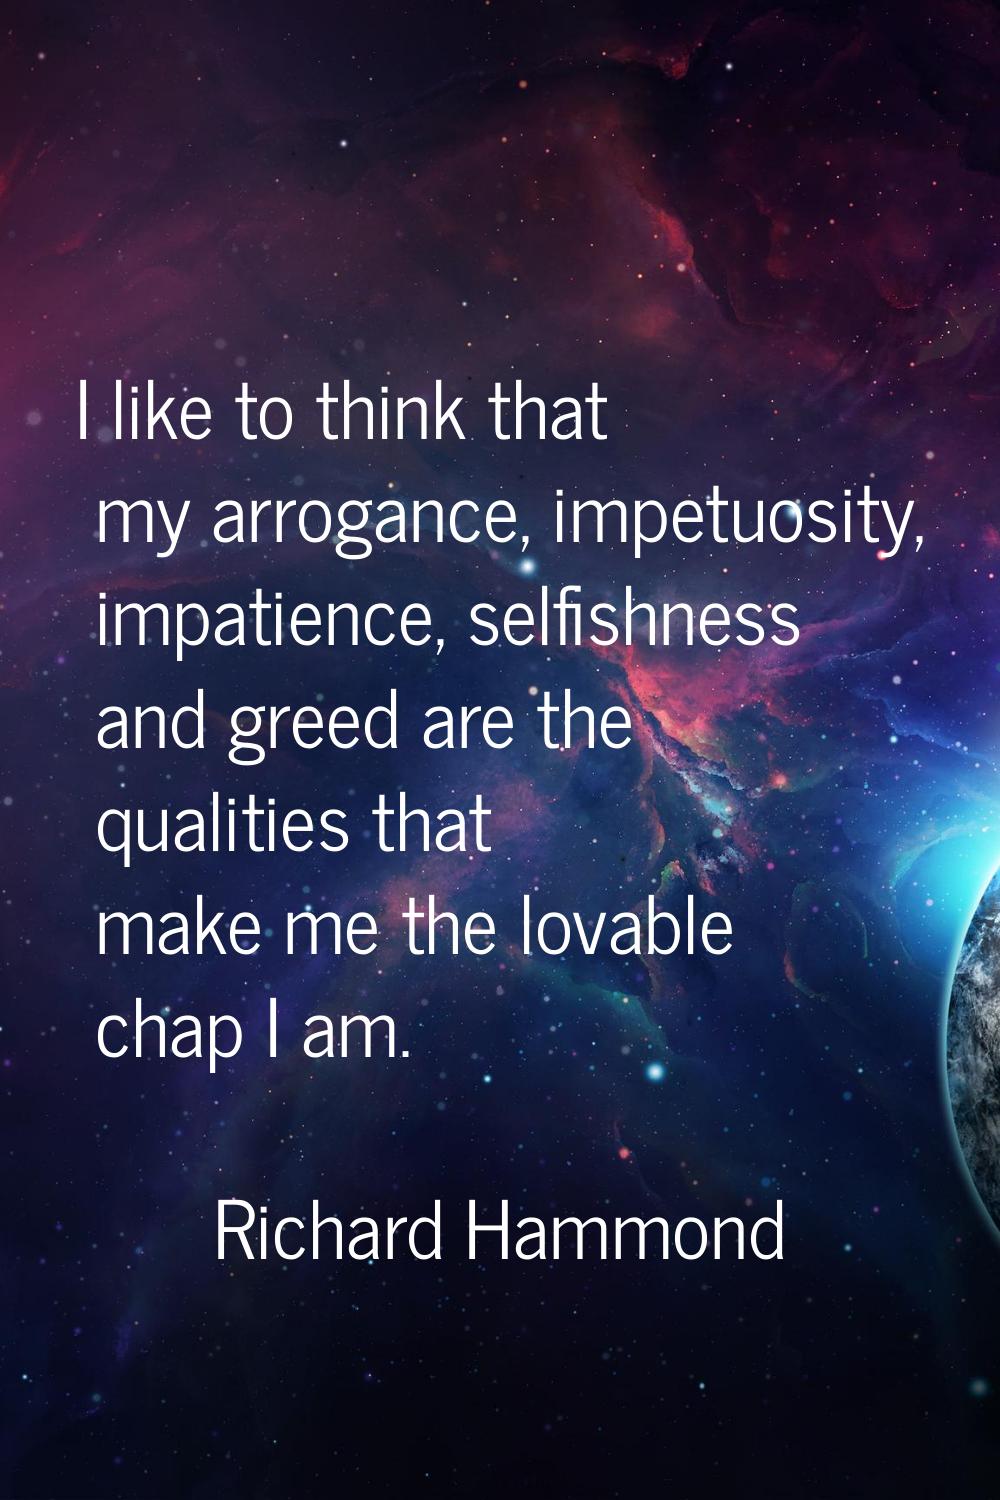 I like to think that my arrogance, impetuosity, impatience, selfishness and greed are the qualities